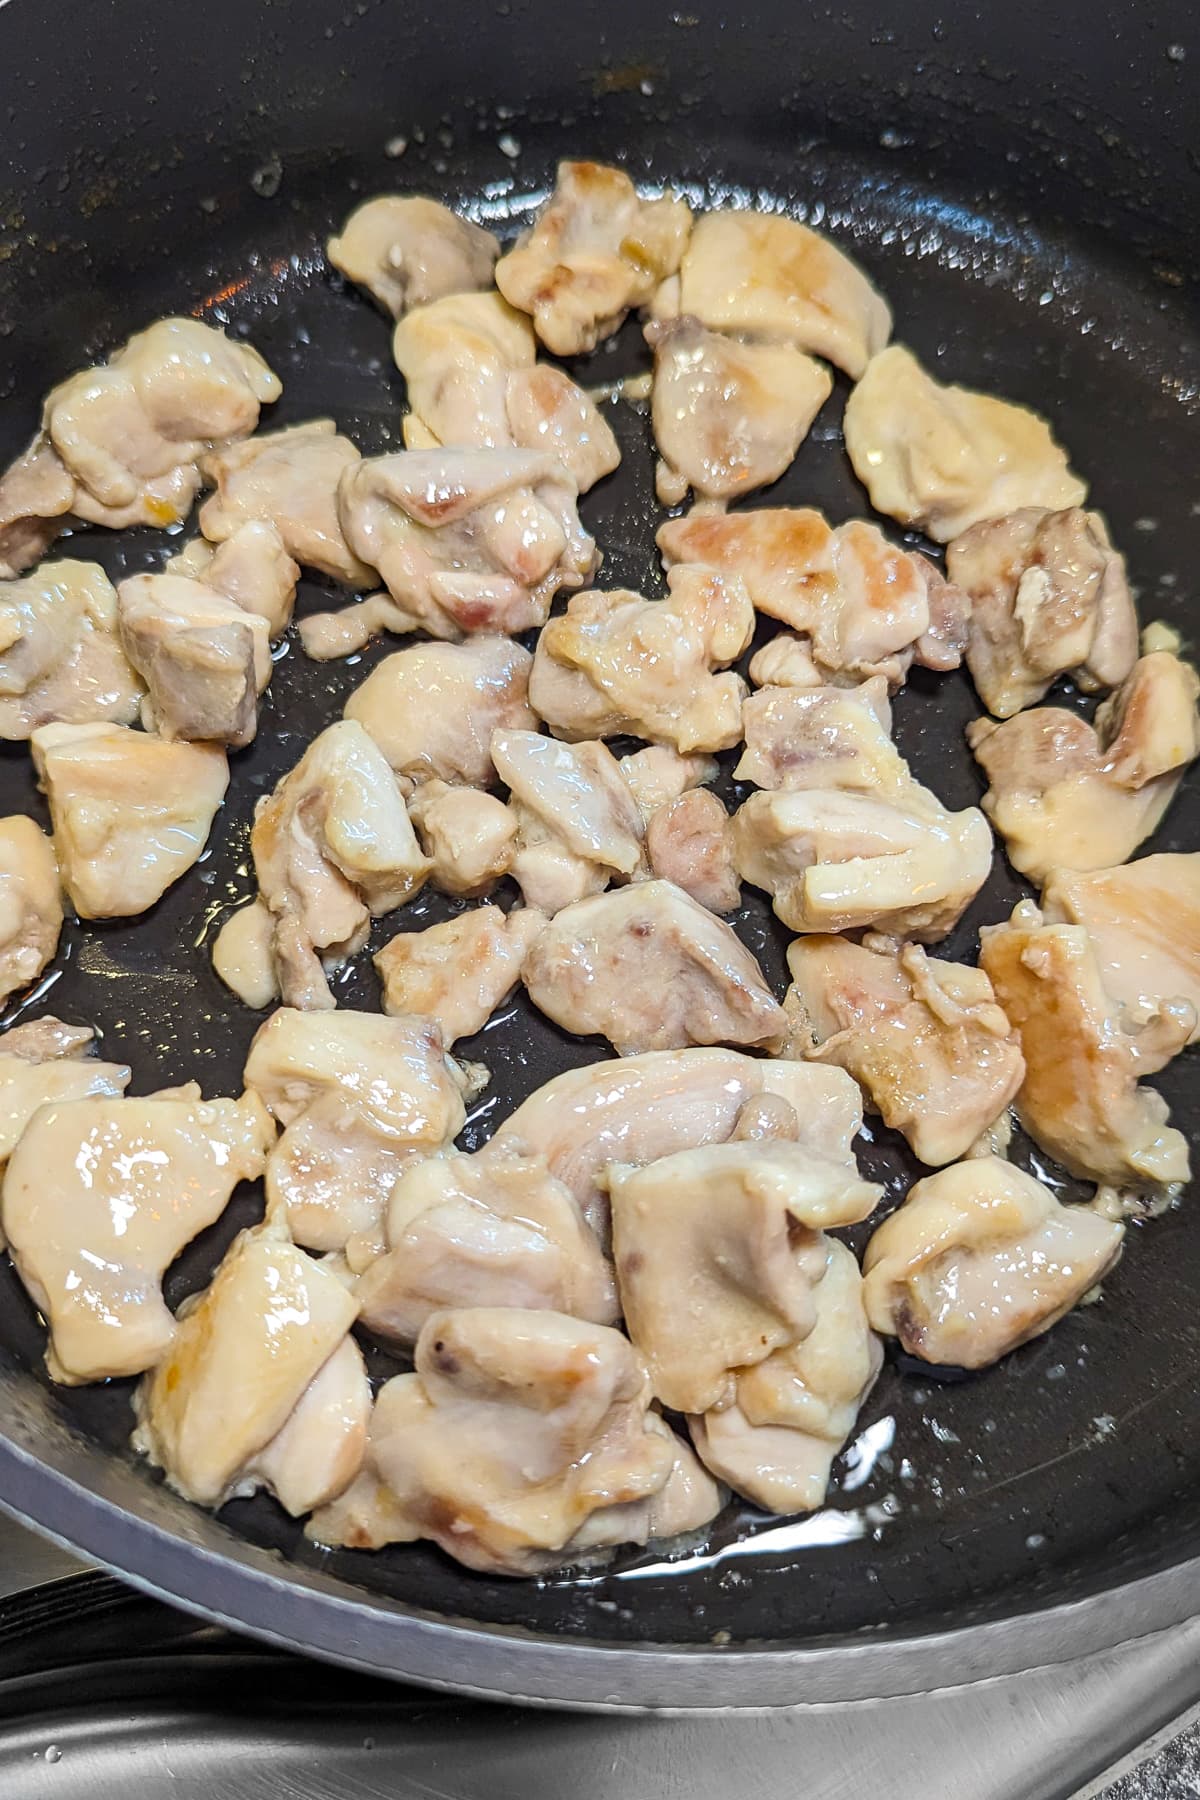 Frying chicken in a pan on the stove.